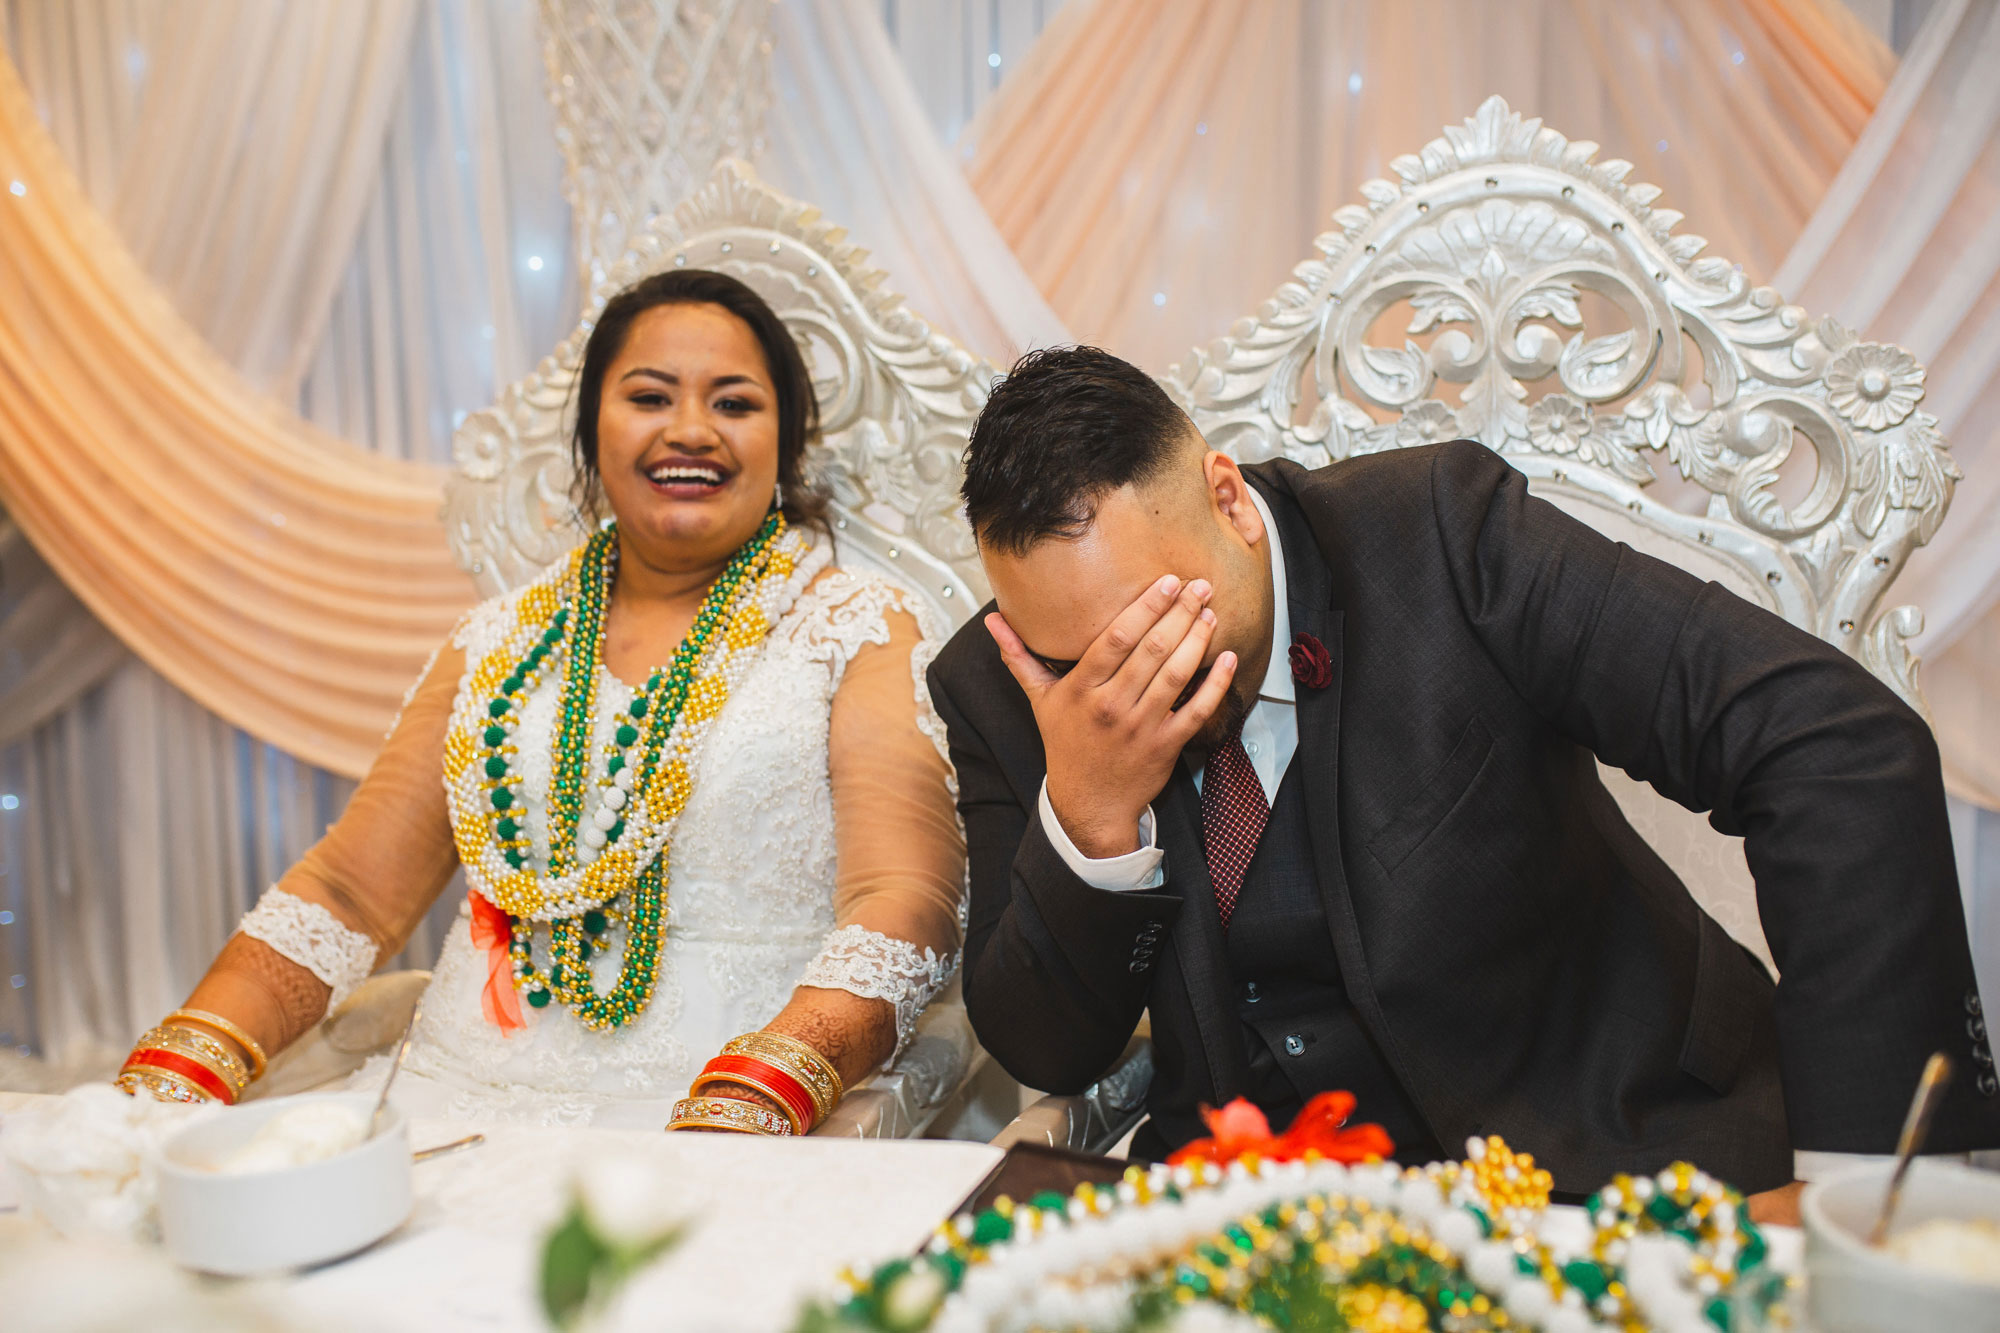 groom laughing at speech